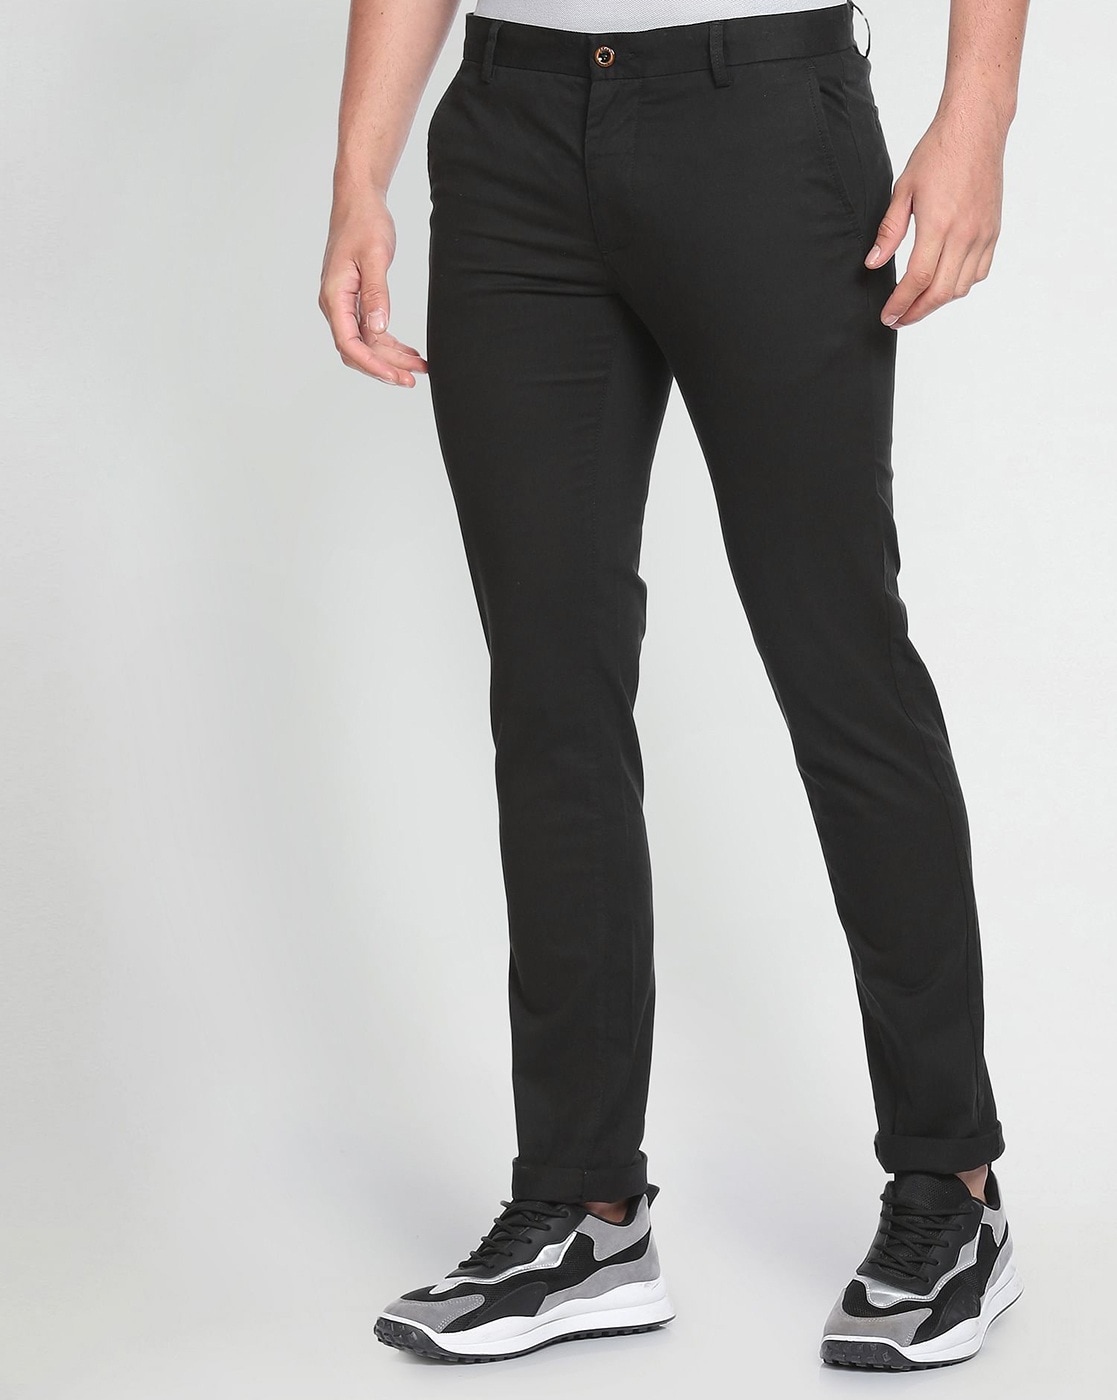 Mens Trousers  Buy Gym  Sports Trousers Online  IRONGEAR  Page 2   IRONGEAR Fitness